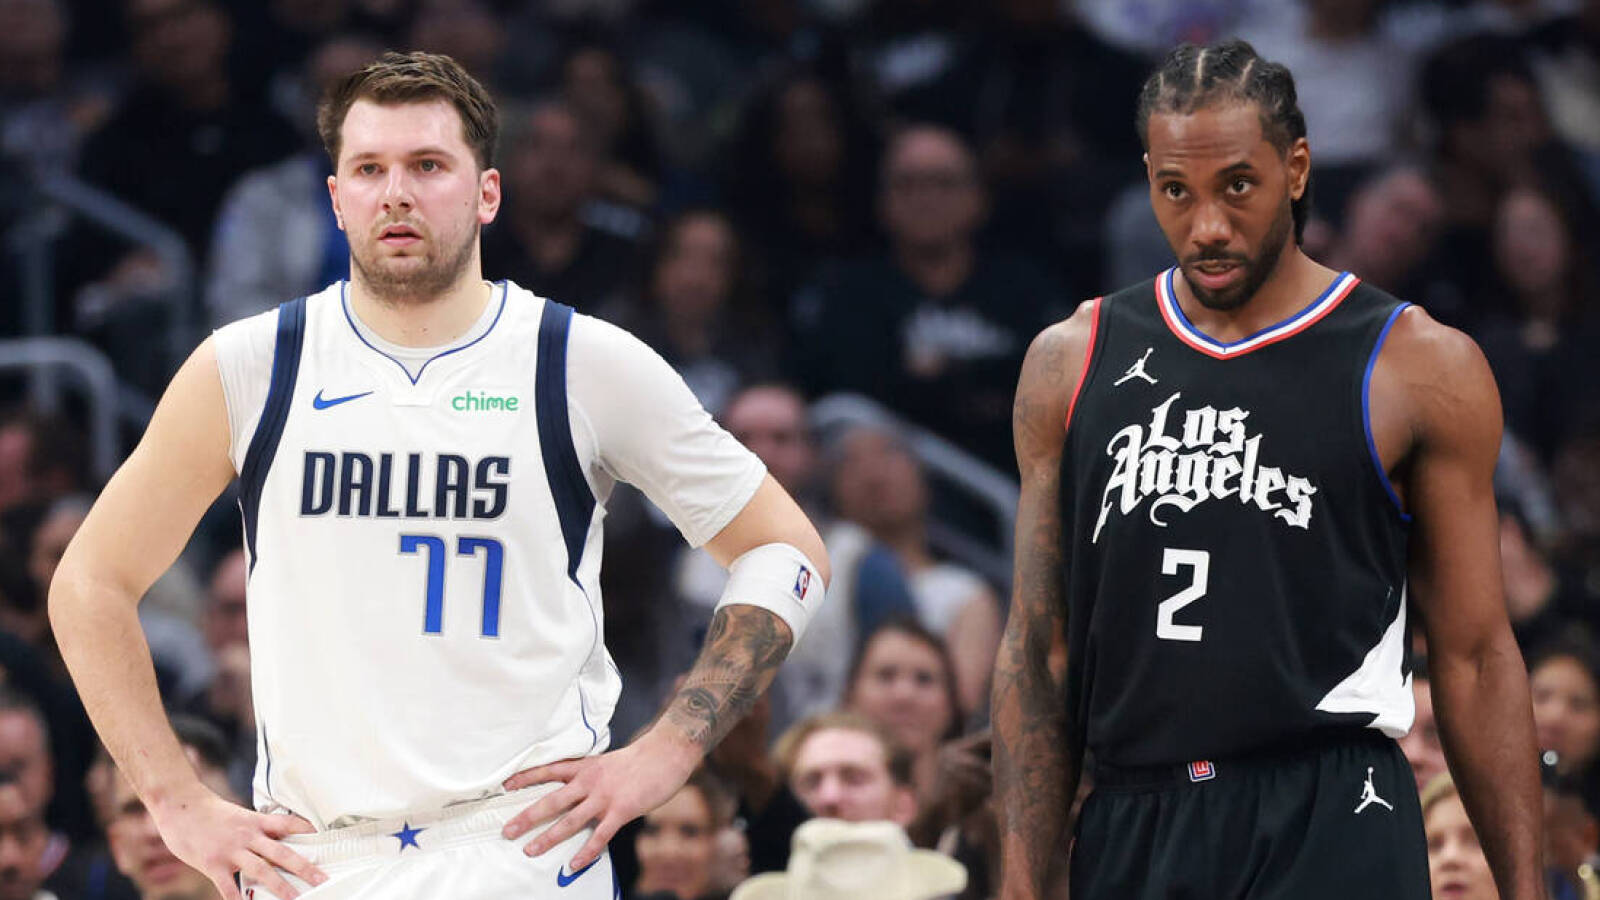 Clippers stars don't show up in ugly Game 3 loss as Mavericks take 2-1 lead